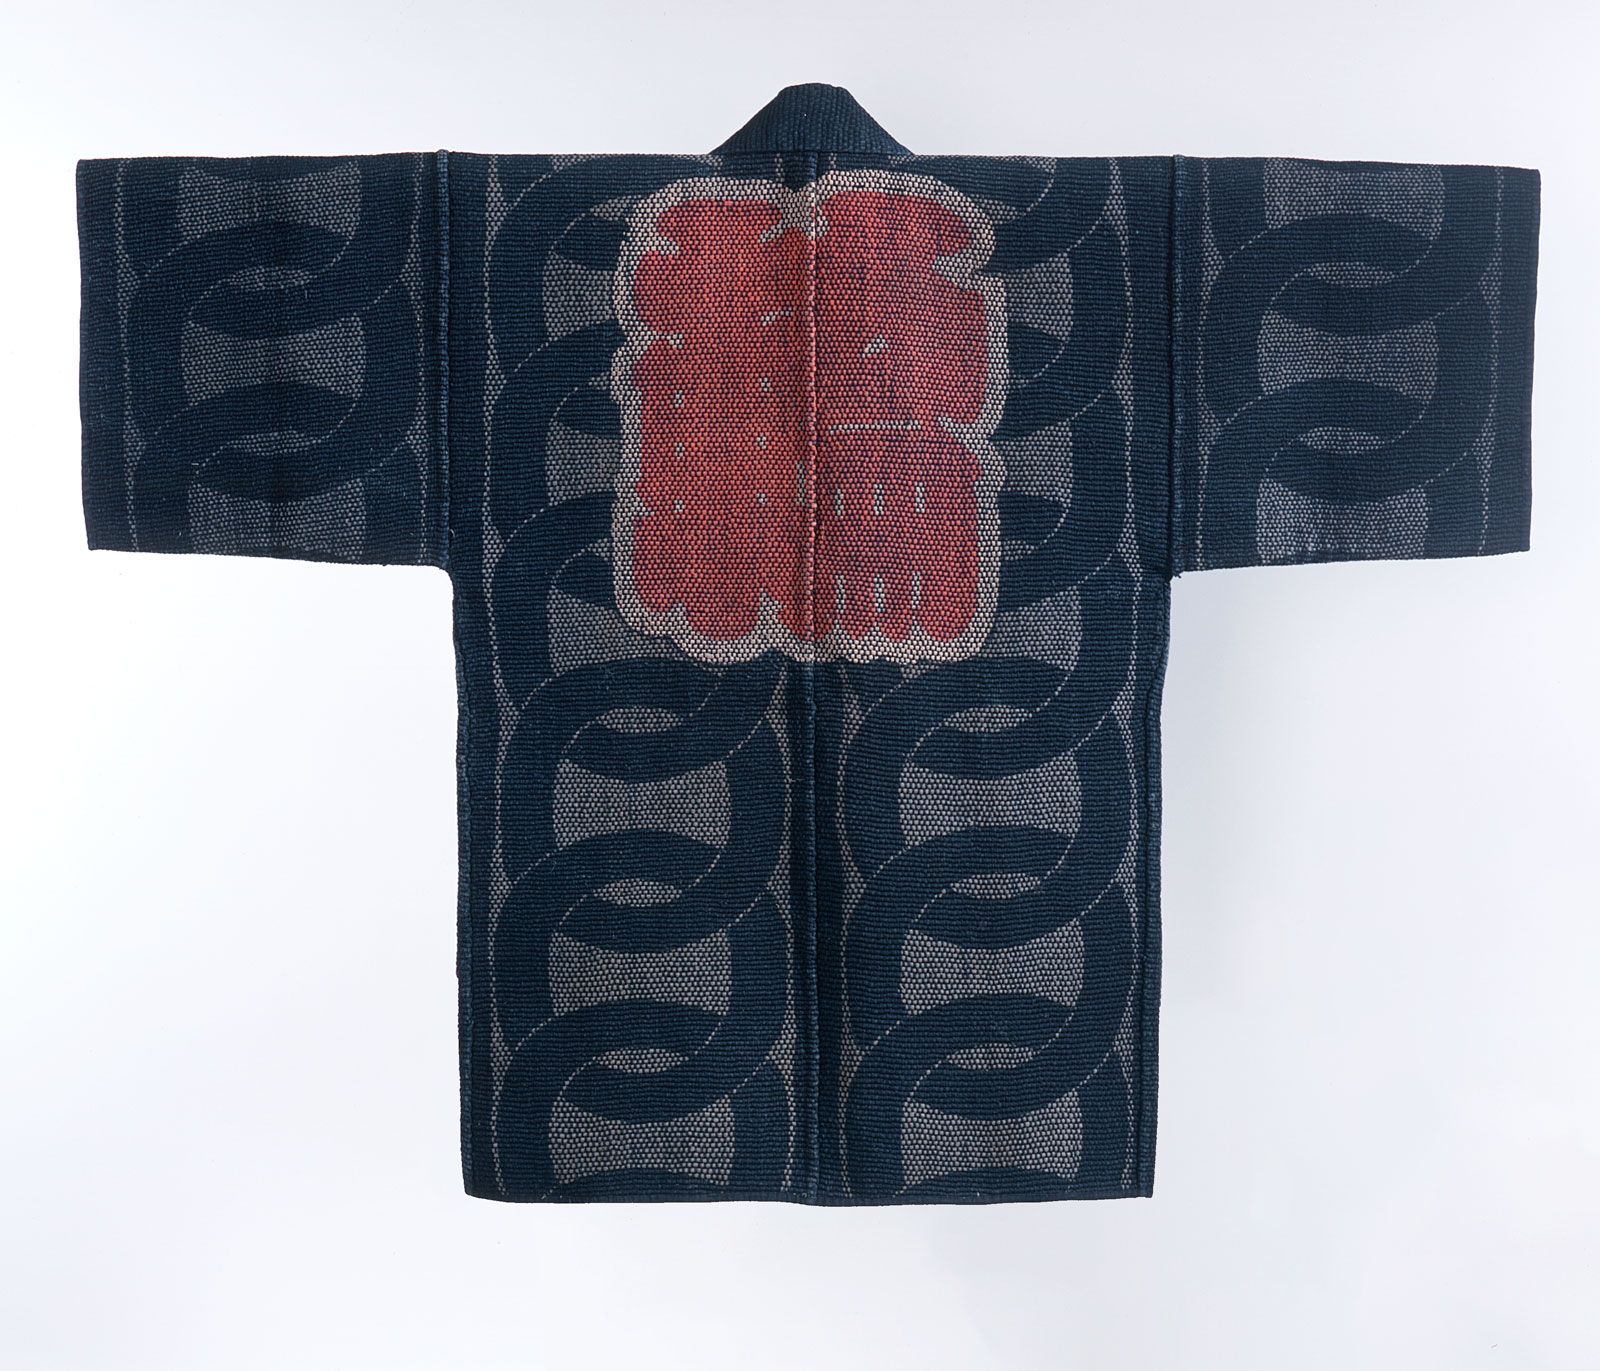 The jacket of a firefighter in Edo Japan, thousands of stitches form a beautiful design in blue, white and red